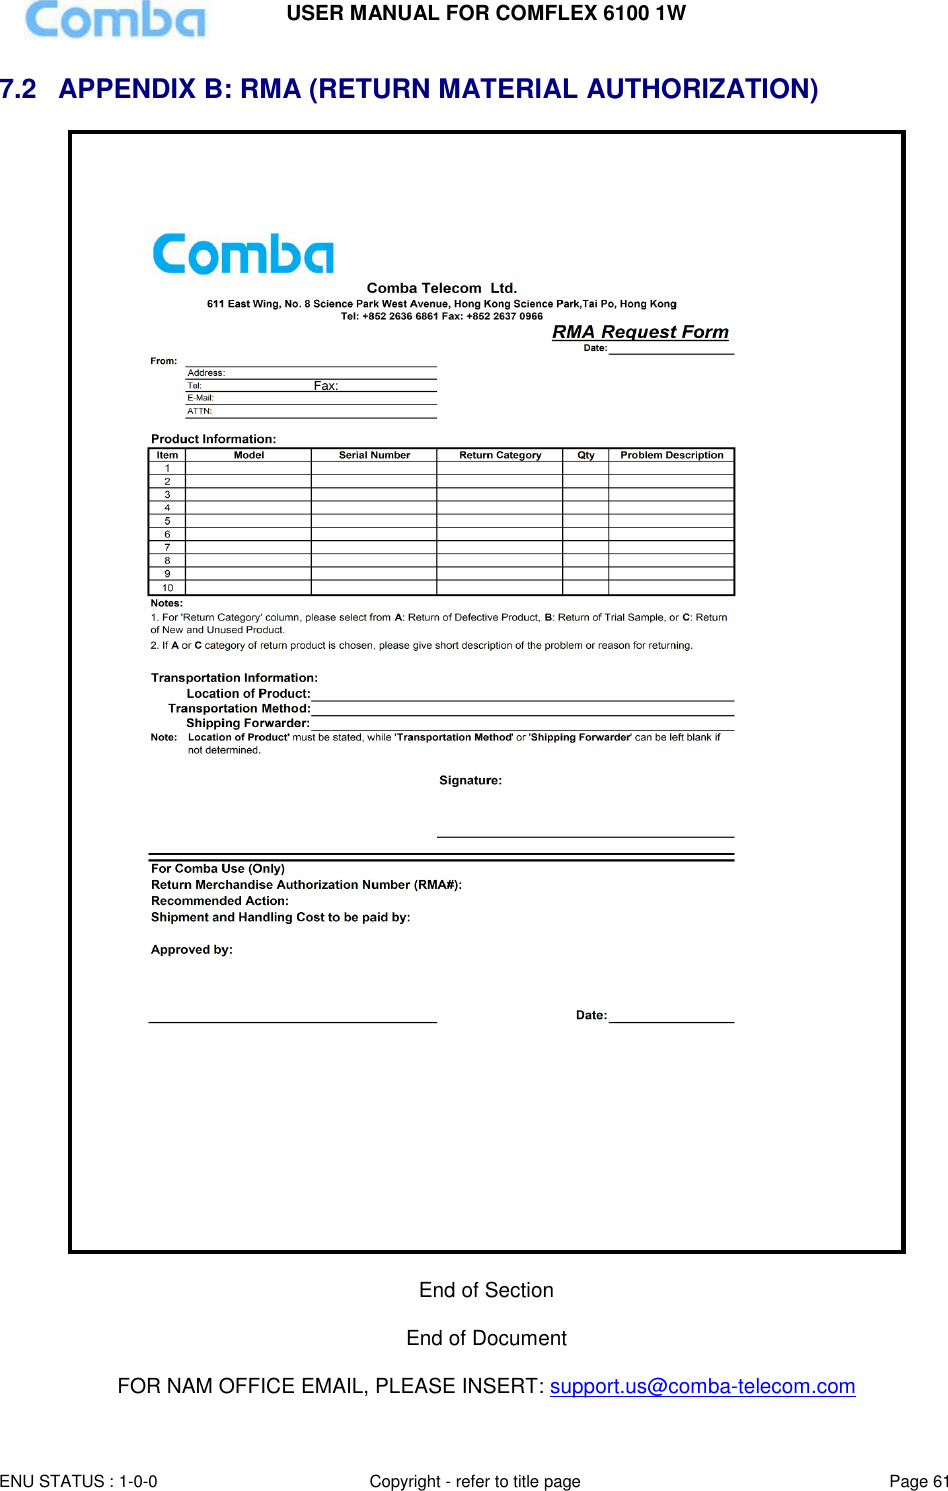 USER MANUAL FOR COMFLEX 6100 1W  ENU STATUS : 1-0-0 Copyright - refer to title page Page 61     7.2  APPENDIX B: RMA (RETURN MATERIAL AUTHORIZATION)   End of Section  End of Document  FOR NAM OFFICE EMAIL, PLEASE INSERT: support.us@comba-telecom.com 